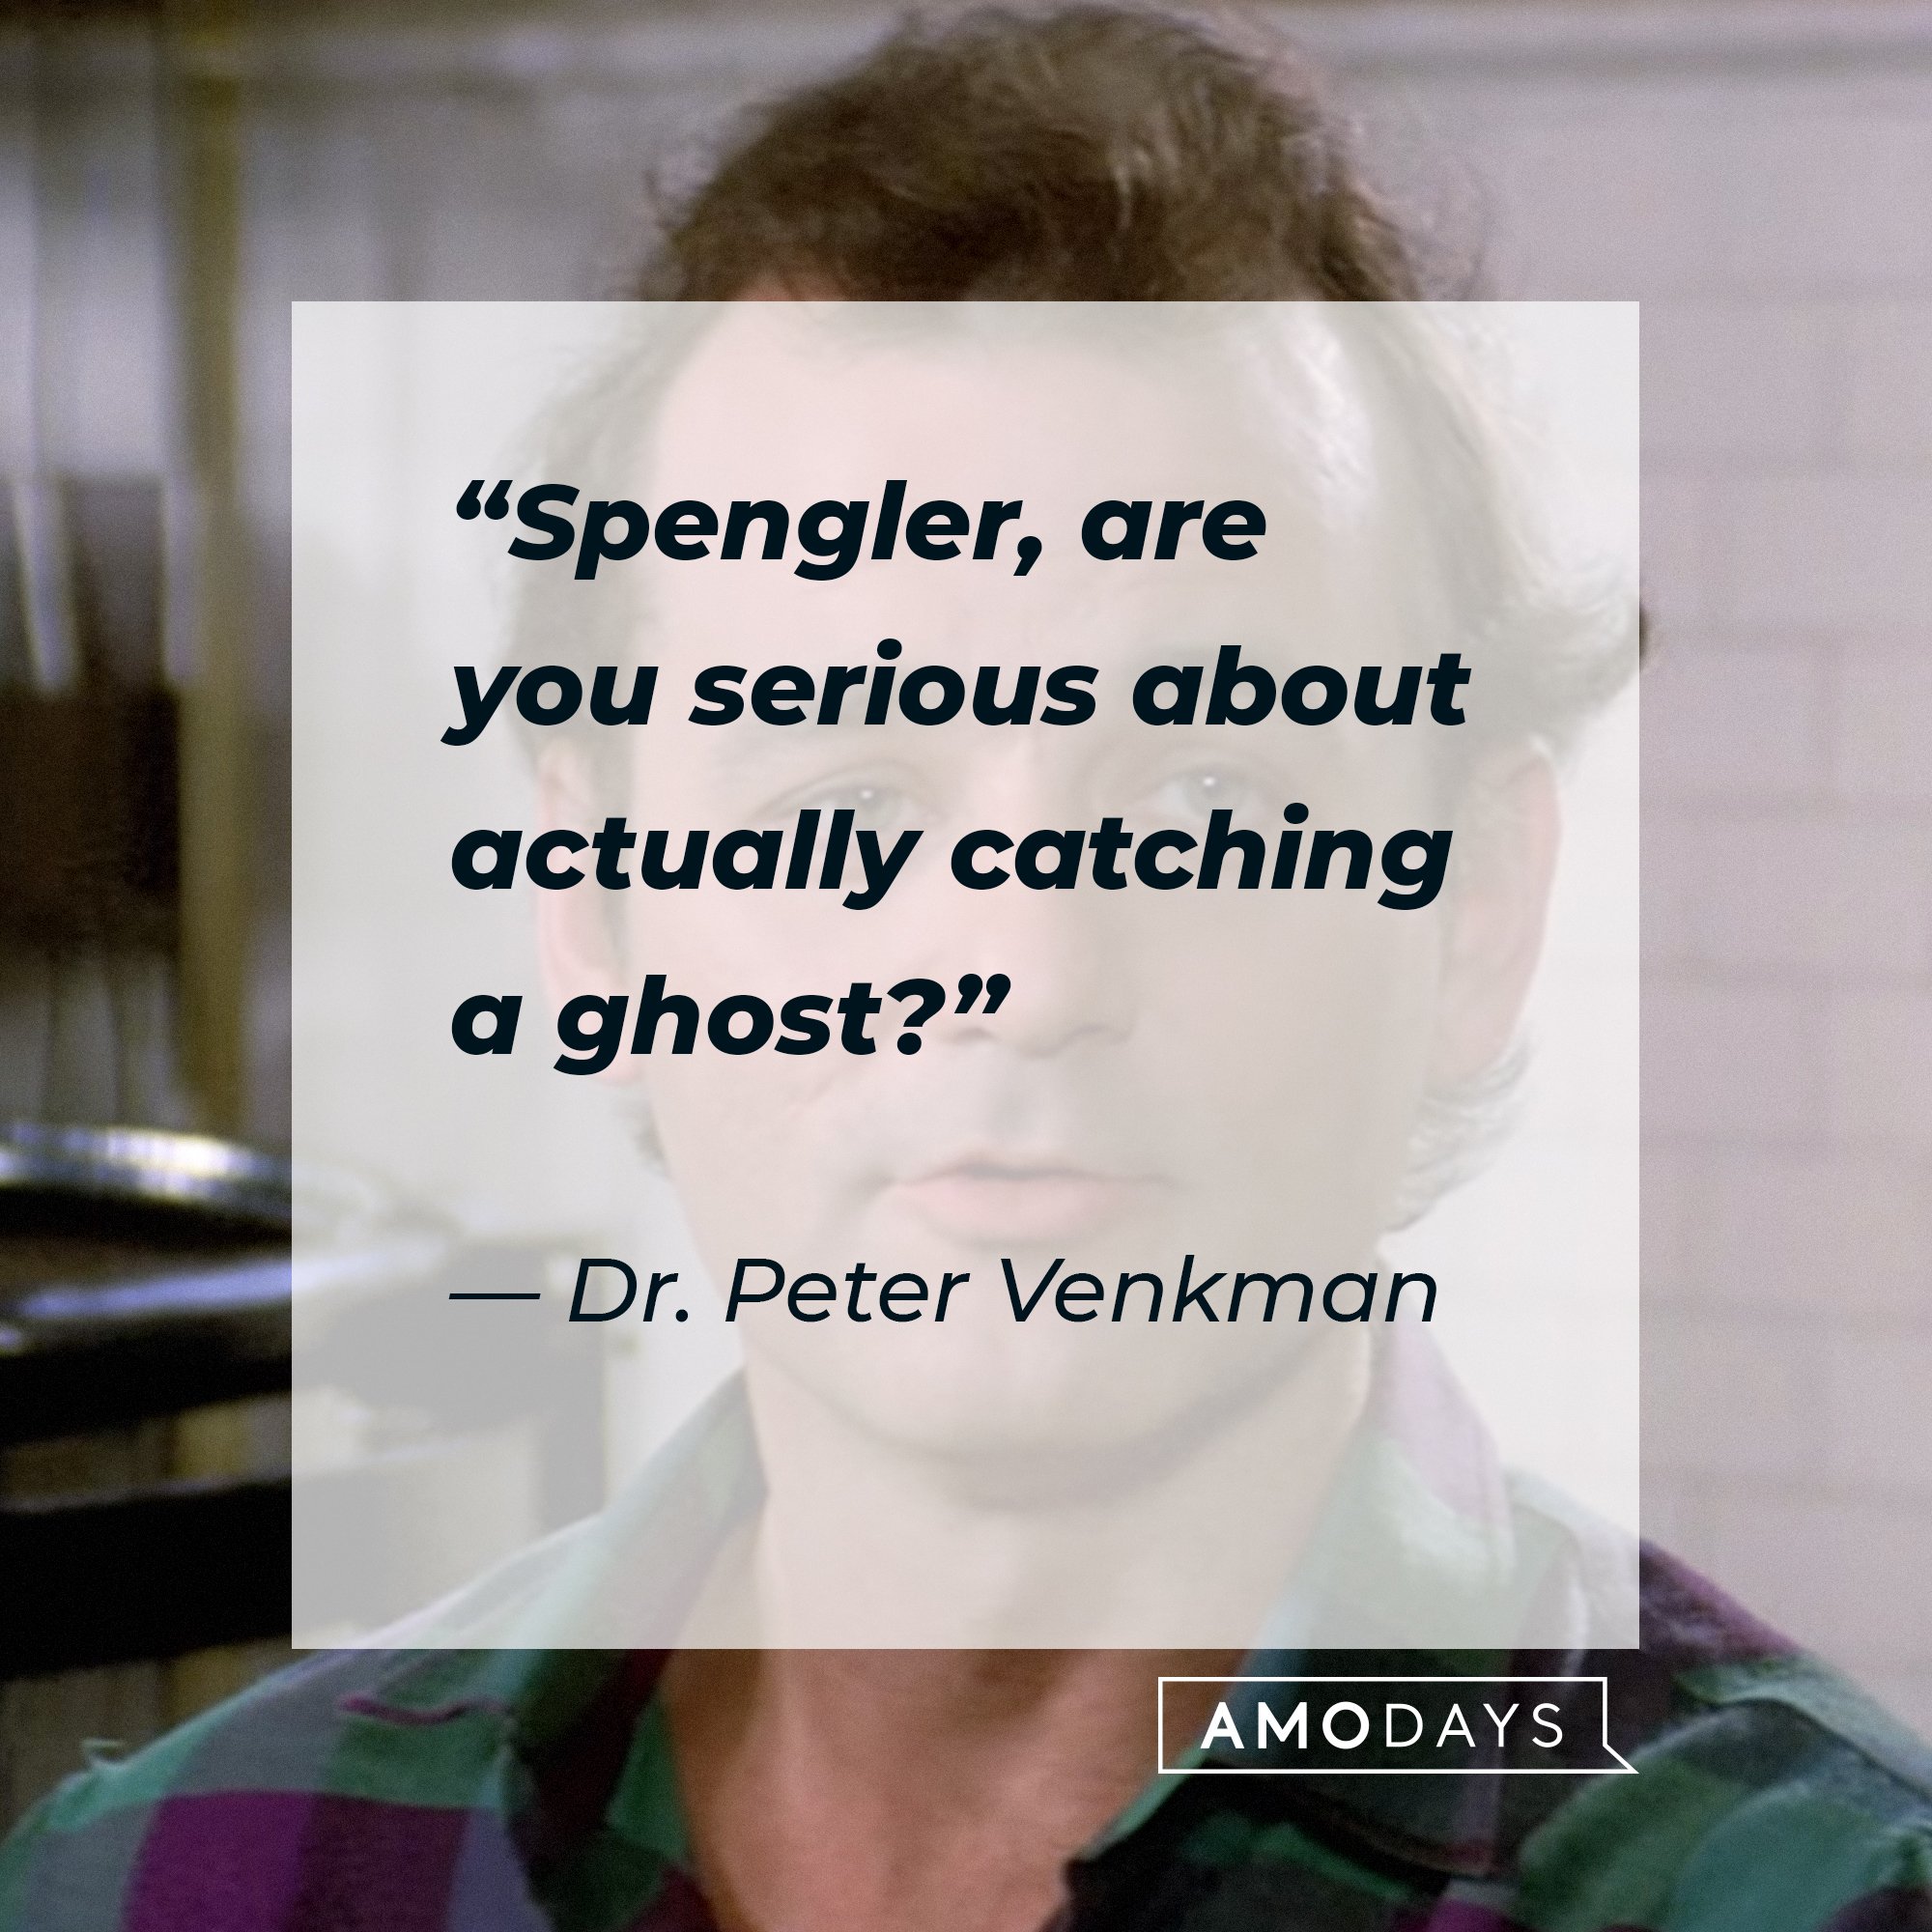 Dr. Peter Venkman's quote: “Spengler, are you serious about actually catching a ghost?” | Image: AmoDays